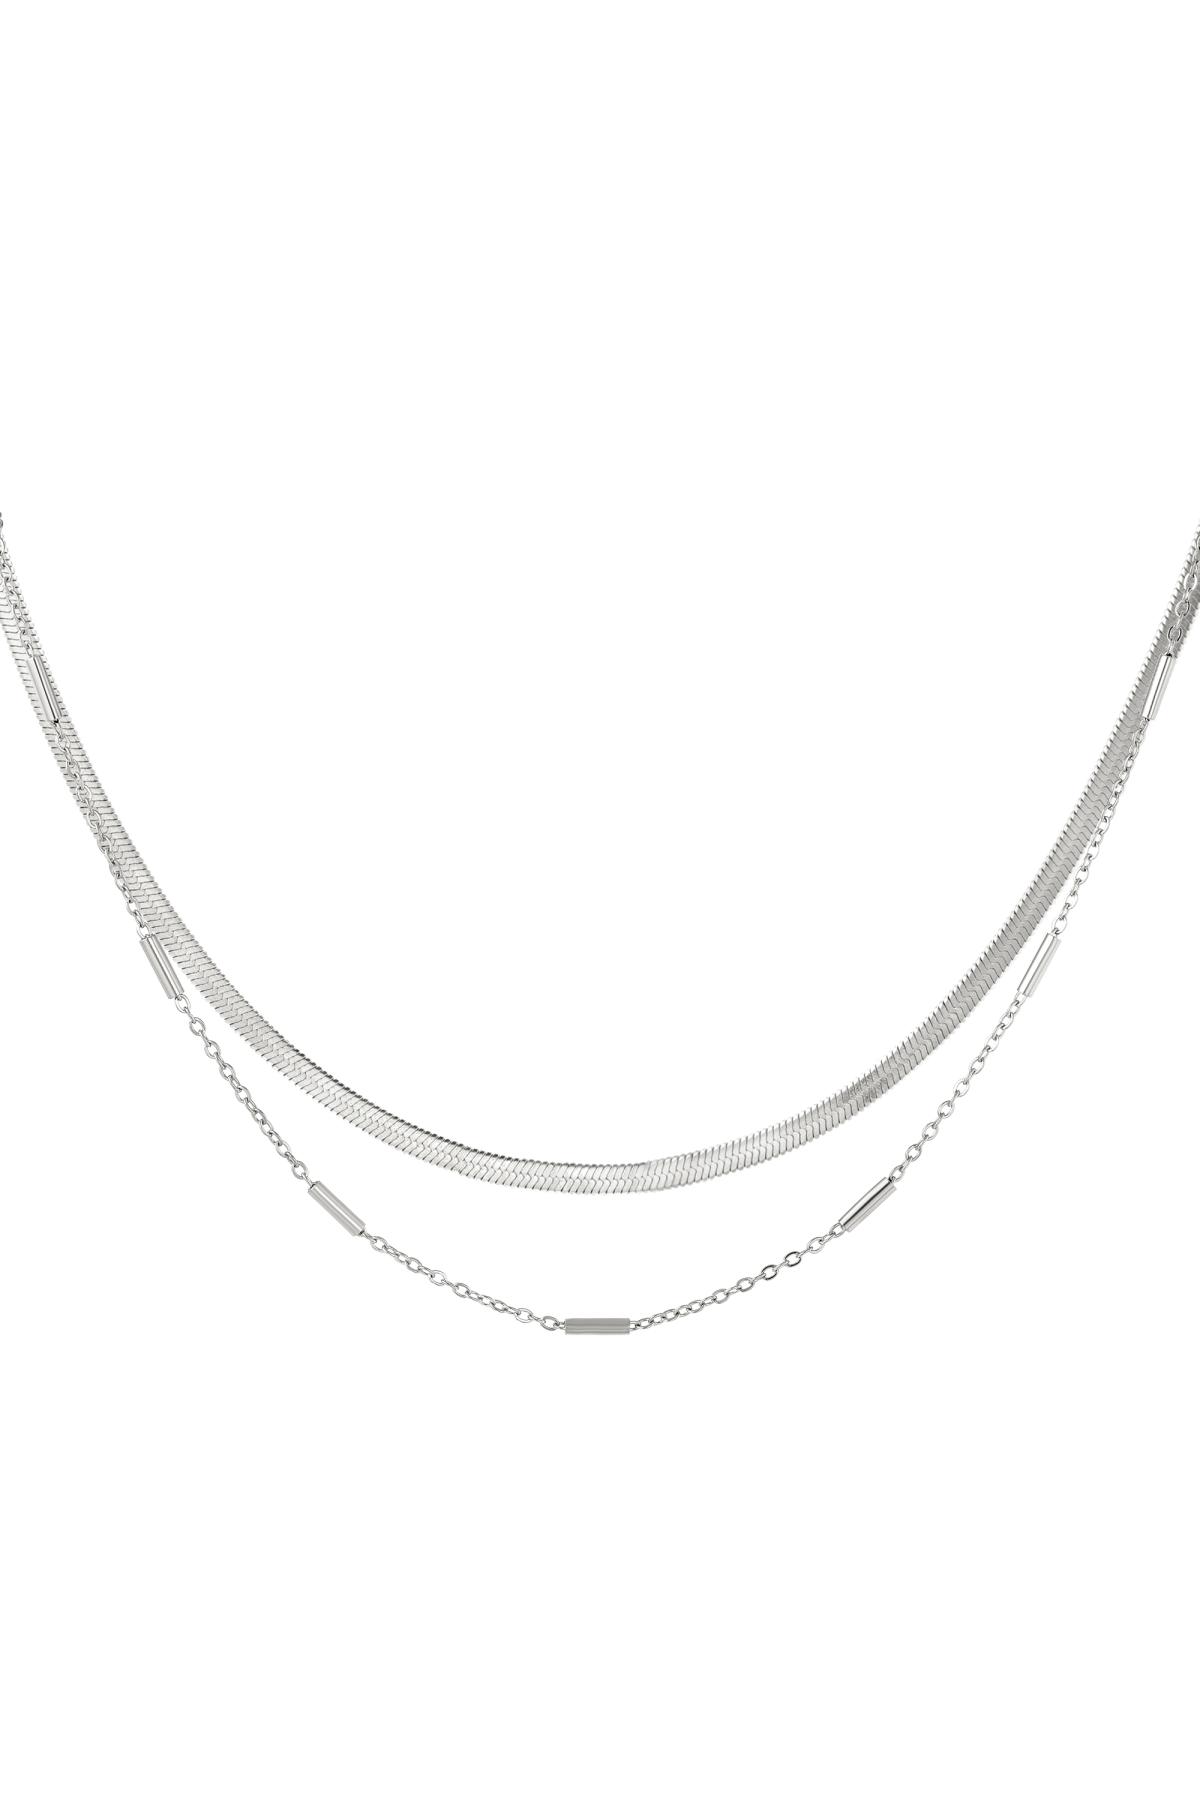 Stainless steel necklace double chained Silver